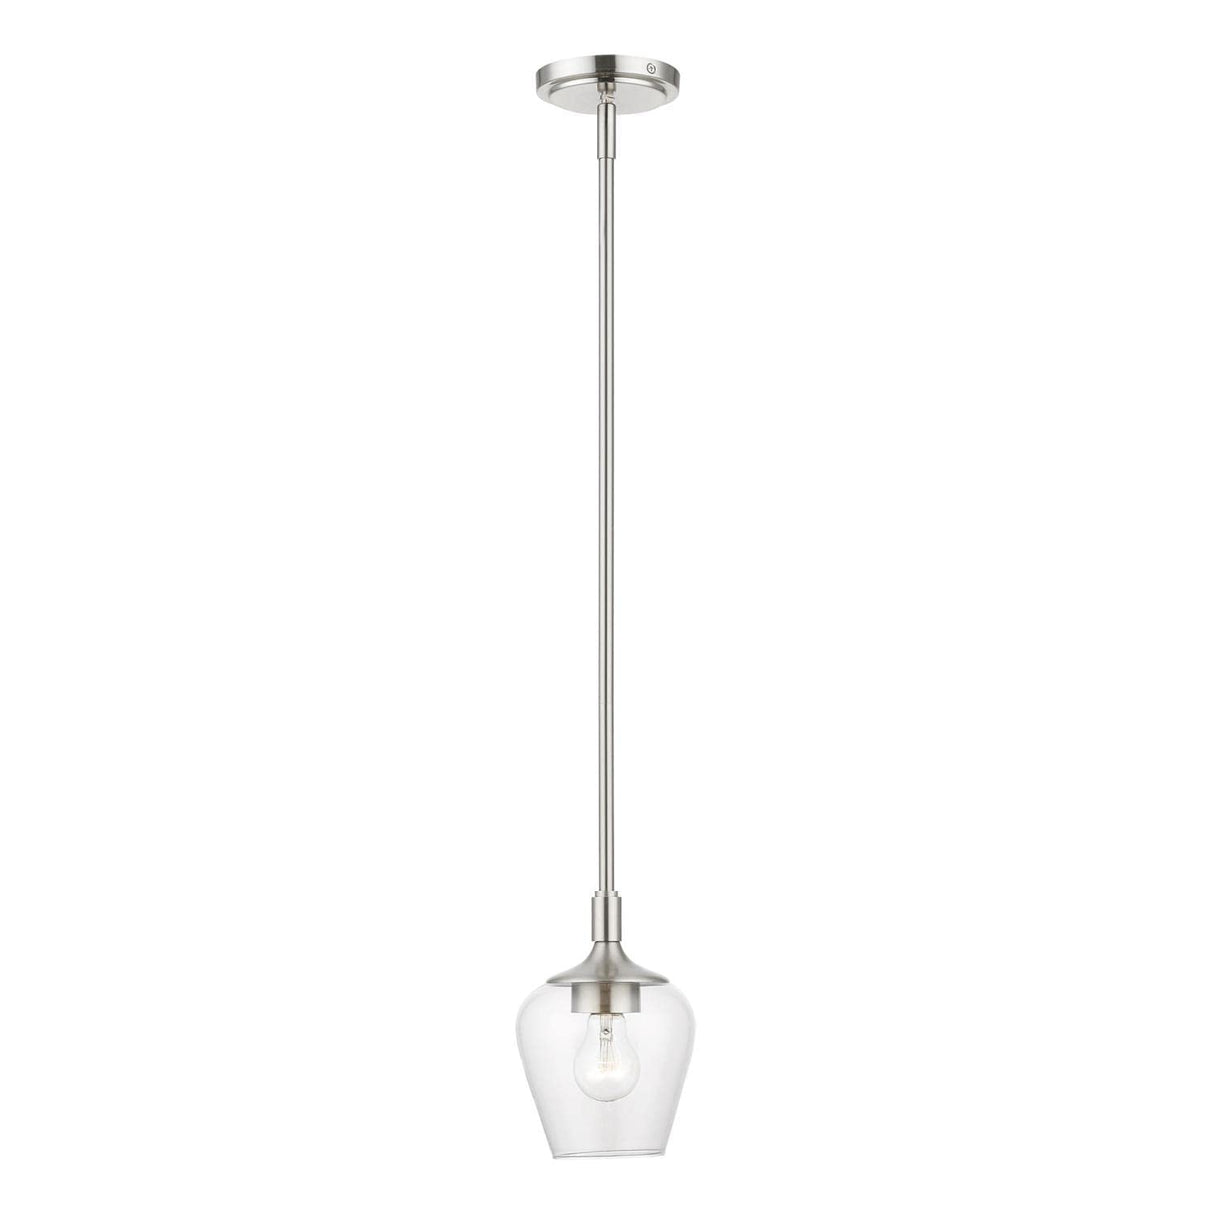 Willow 1 Light Pendant in Brushed Nickel (46721-91)